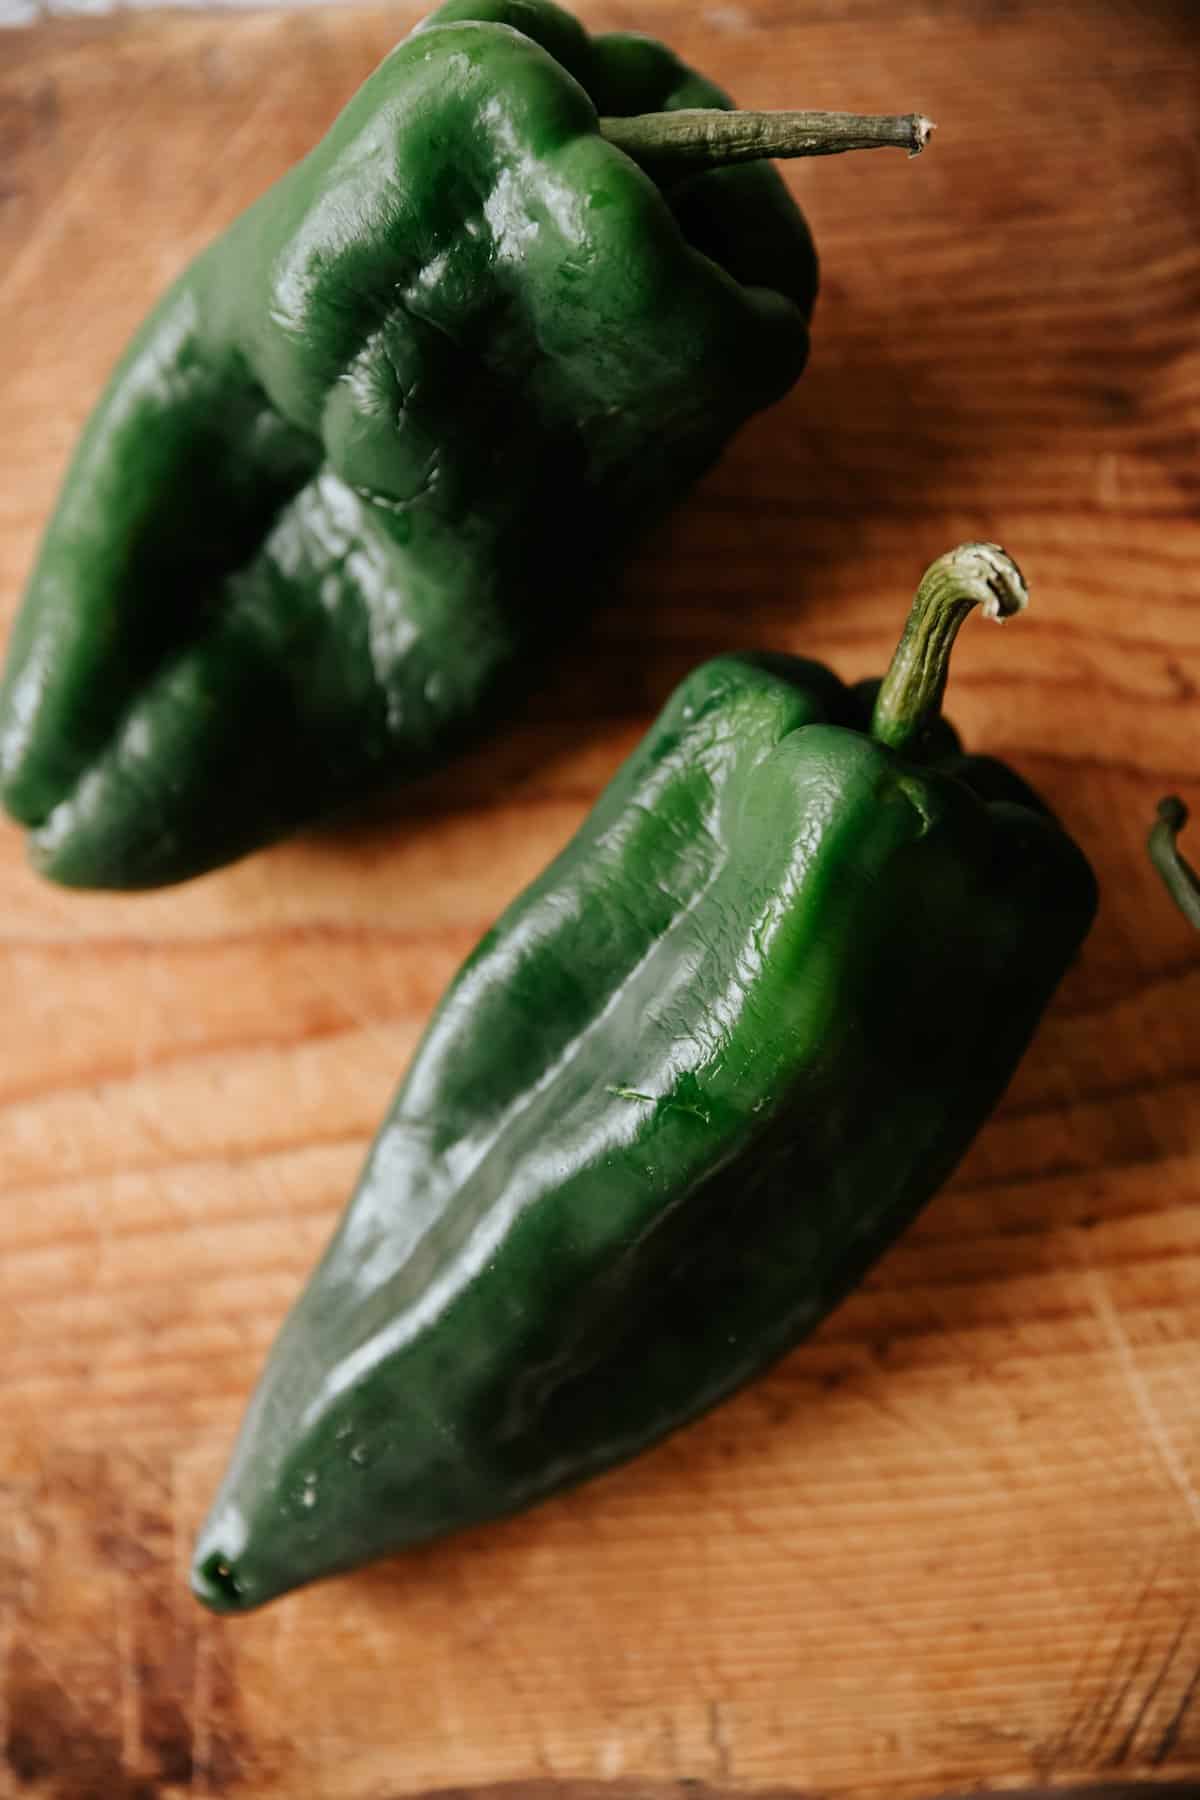 2 whole green poblano chiles on a wooden surface.